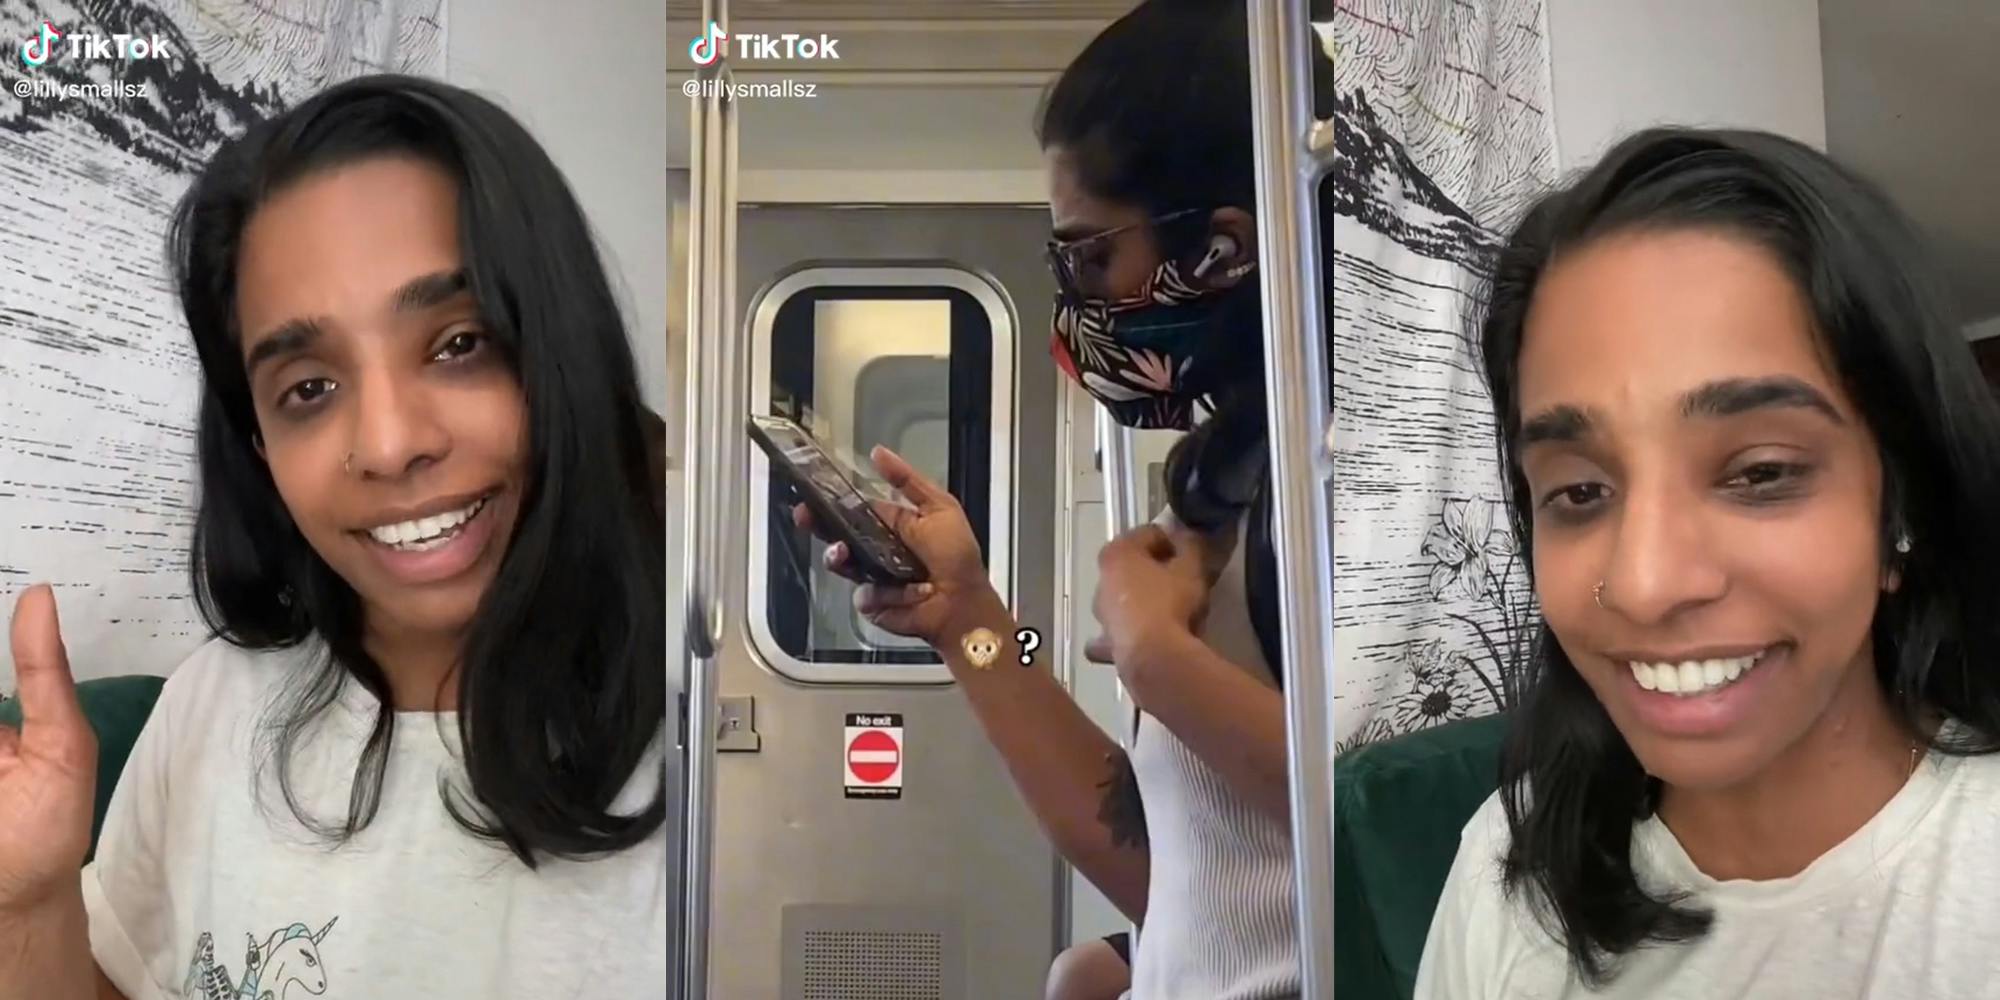 young woman waving (l) young woman looking at phone on subway with caption "monkey emoji?" (c) young woman smiling (r)